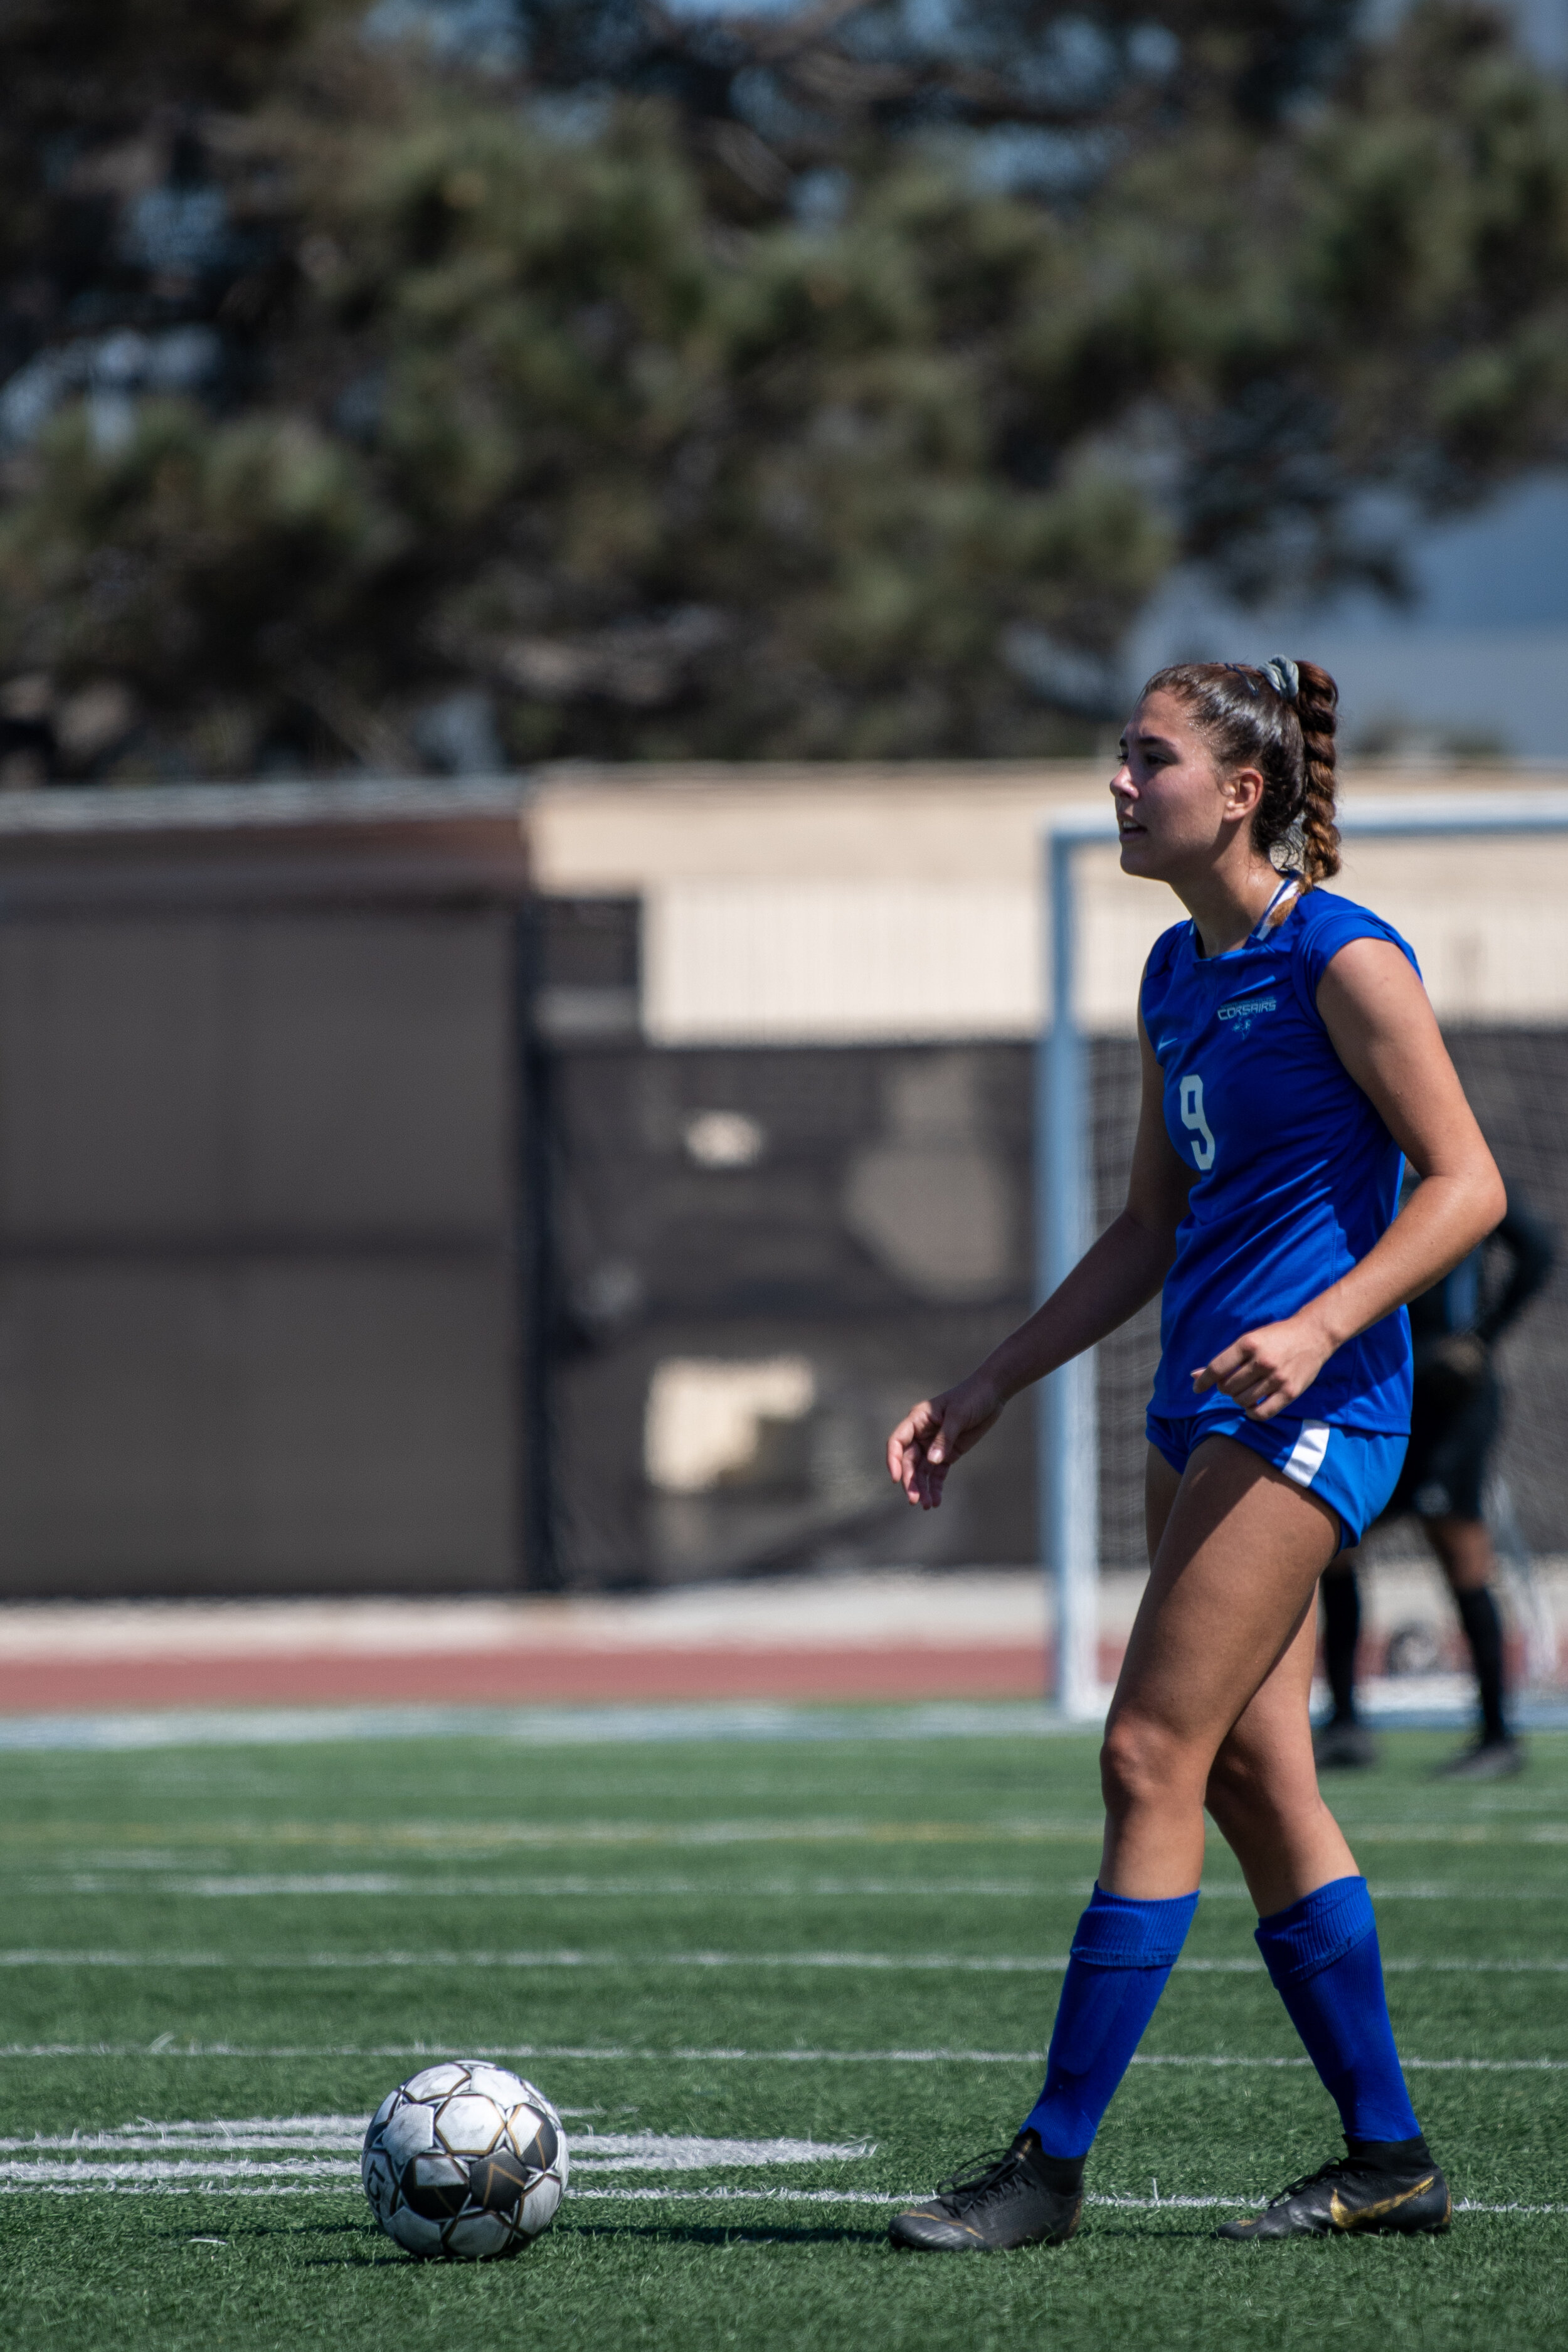  Alexia Mallahi of the Santa Monica College woman's soccer team prepares to send the ball downfield with a Charlie College team member on the Santa Monica College Corsair Field in Santa Monica, Calif. on September 10, 2021. The match against Chaffey 